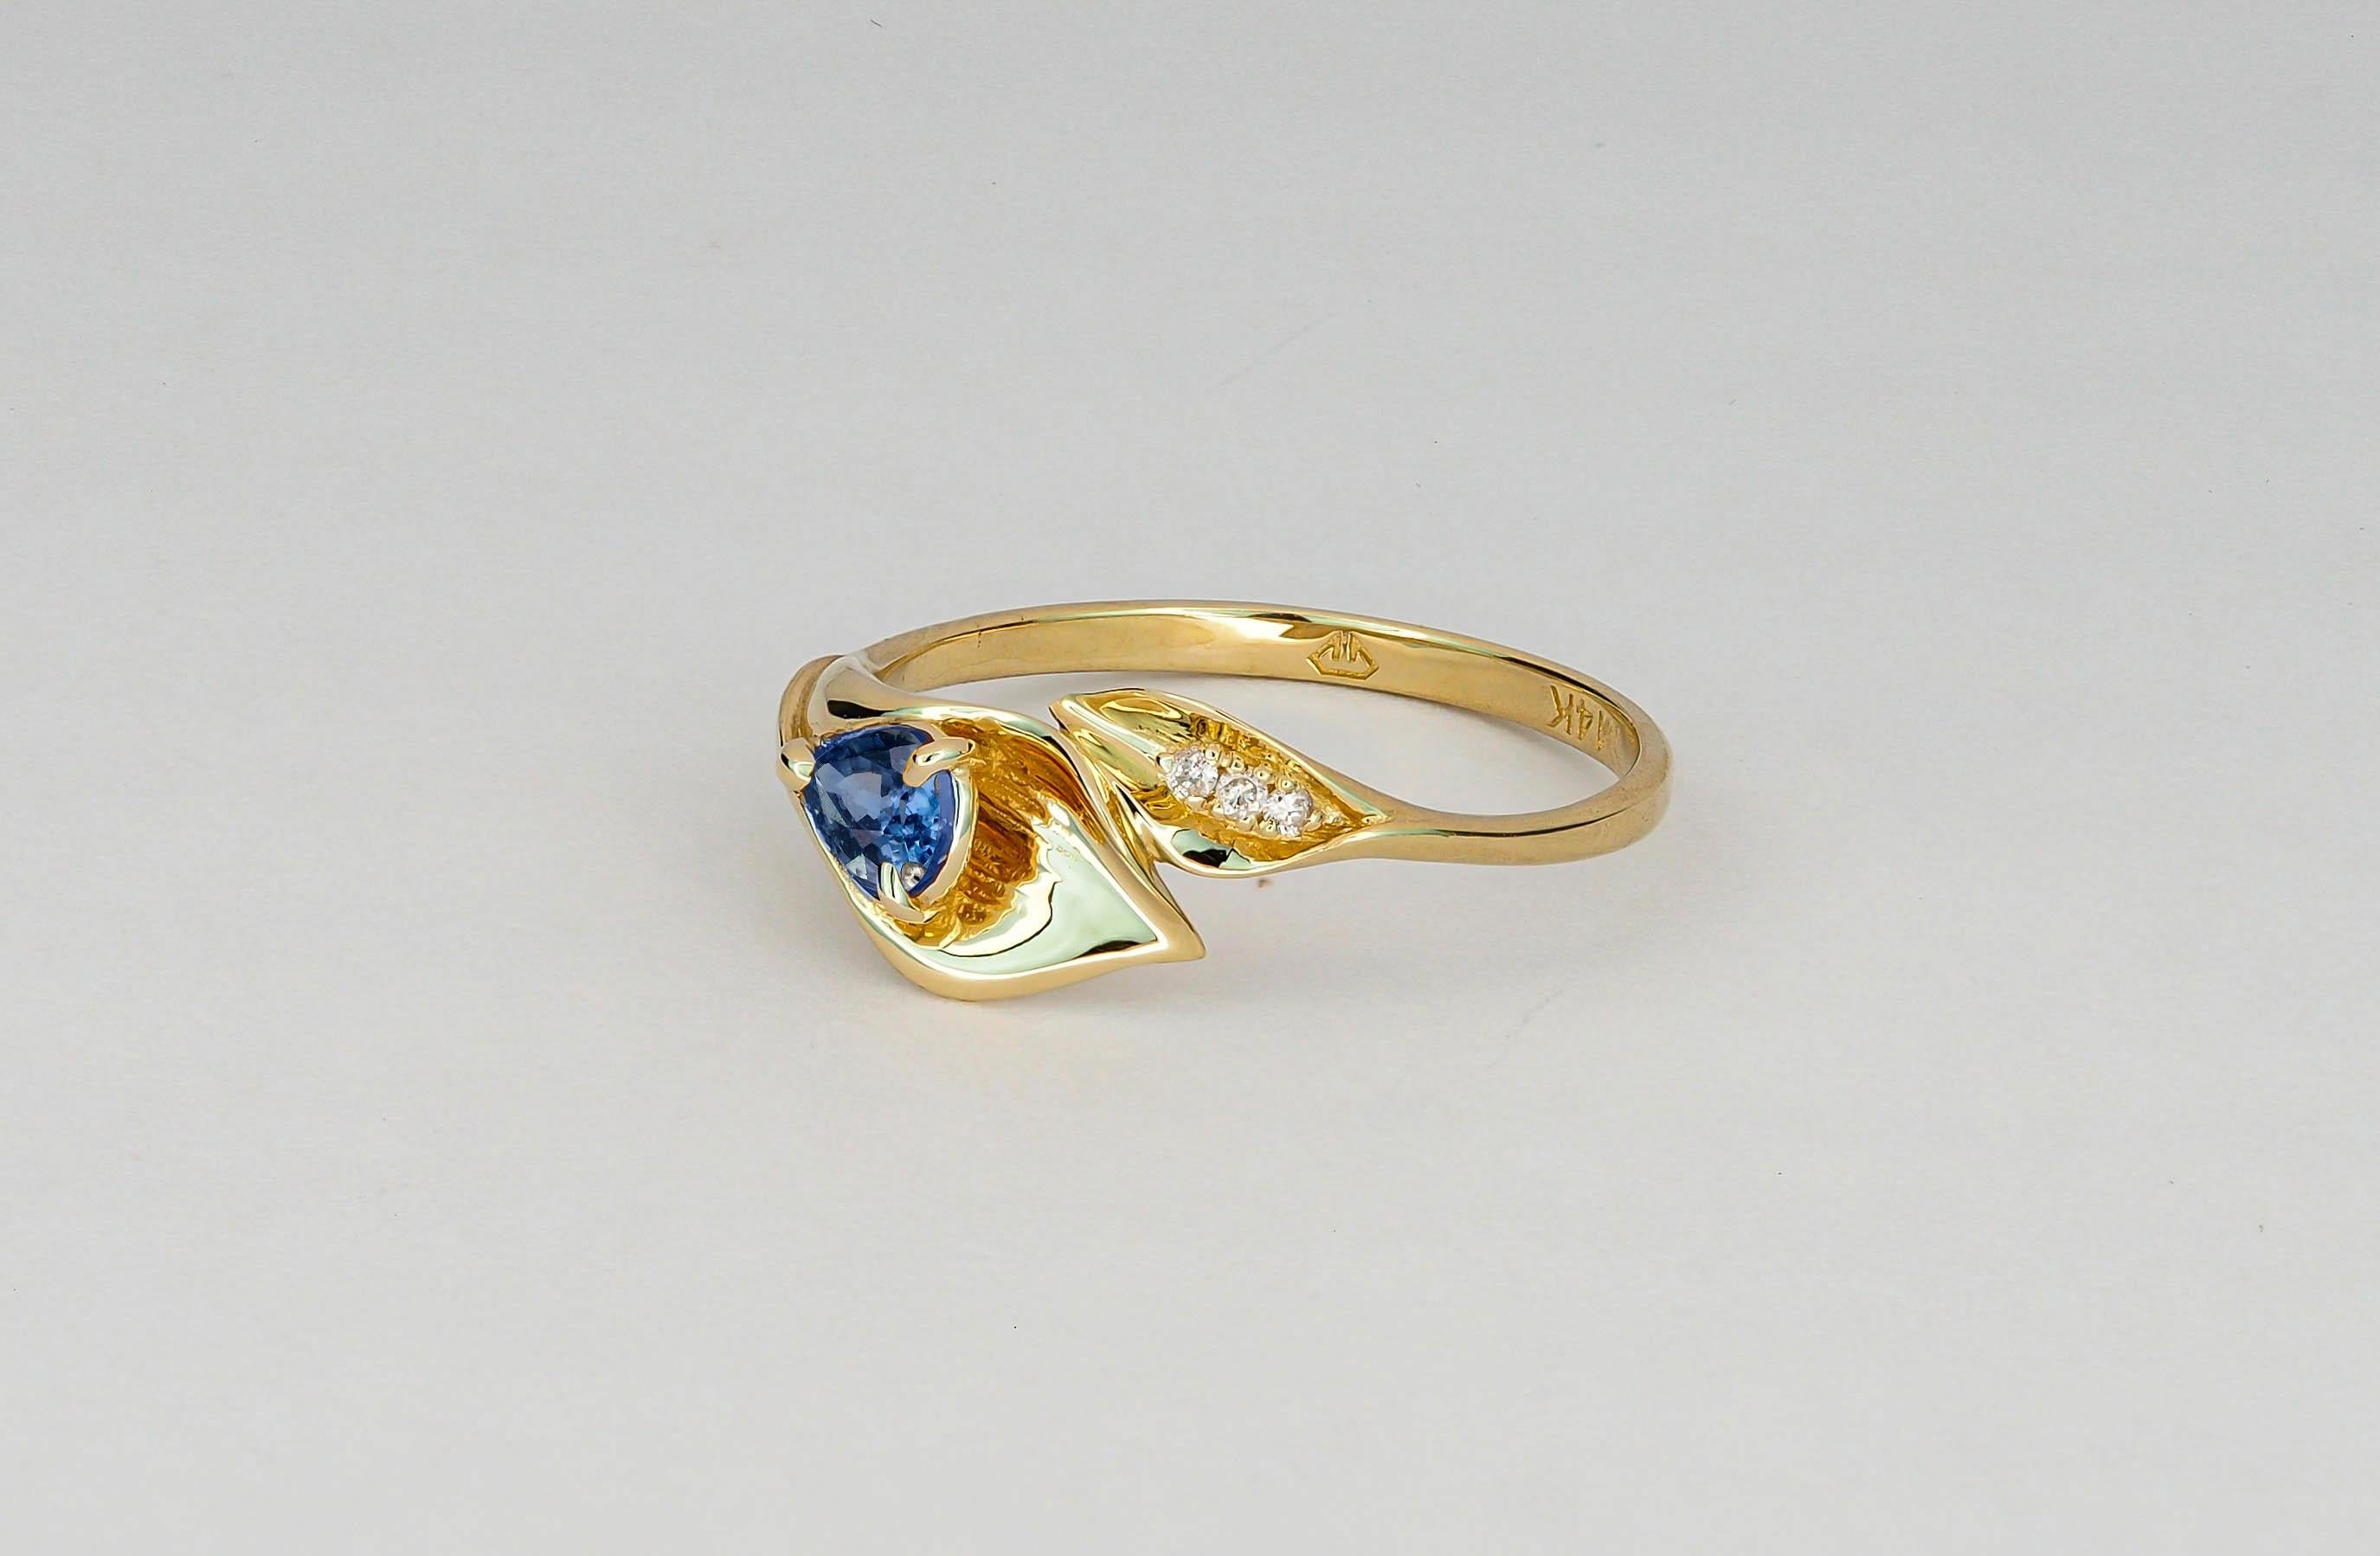 Pear Cut Lily Calla Gold Ring, 14 Karat Gold Ring with Sapphire and Diamonds